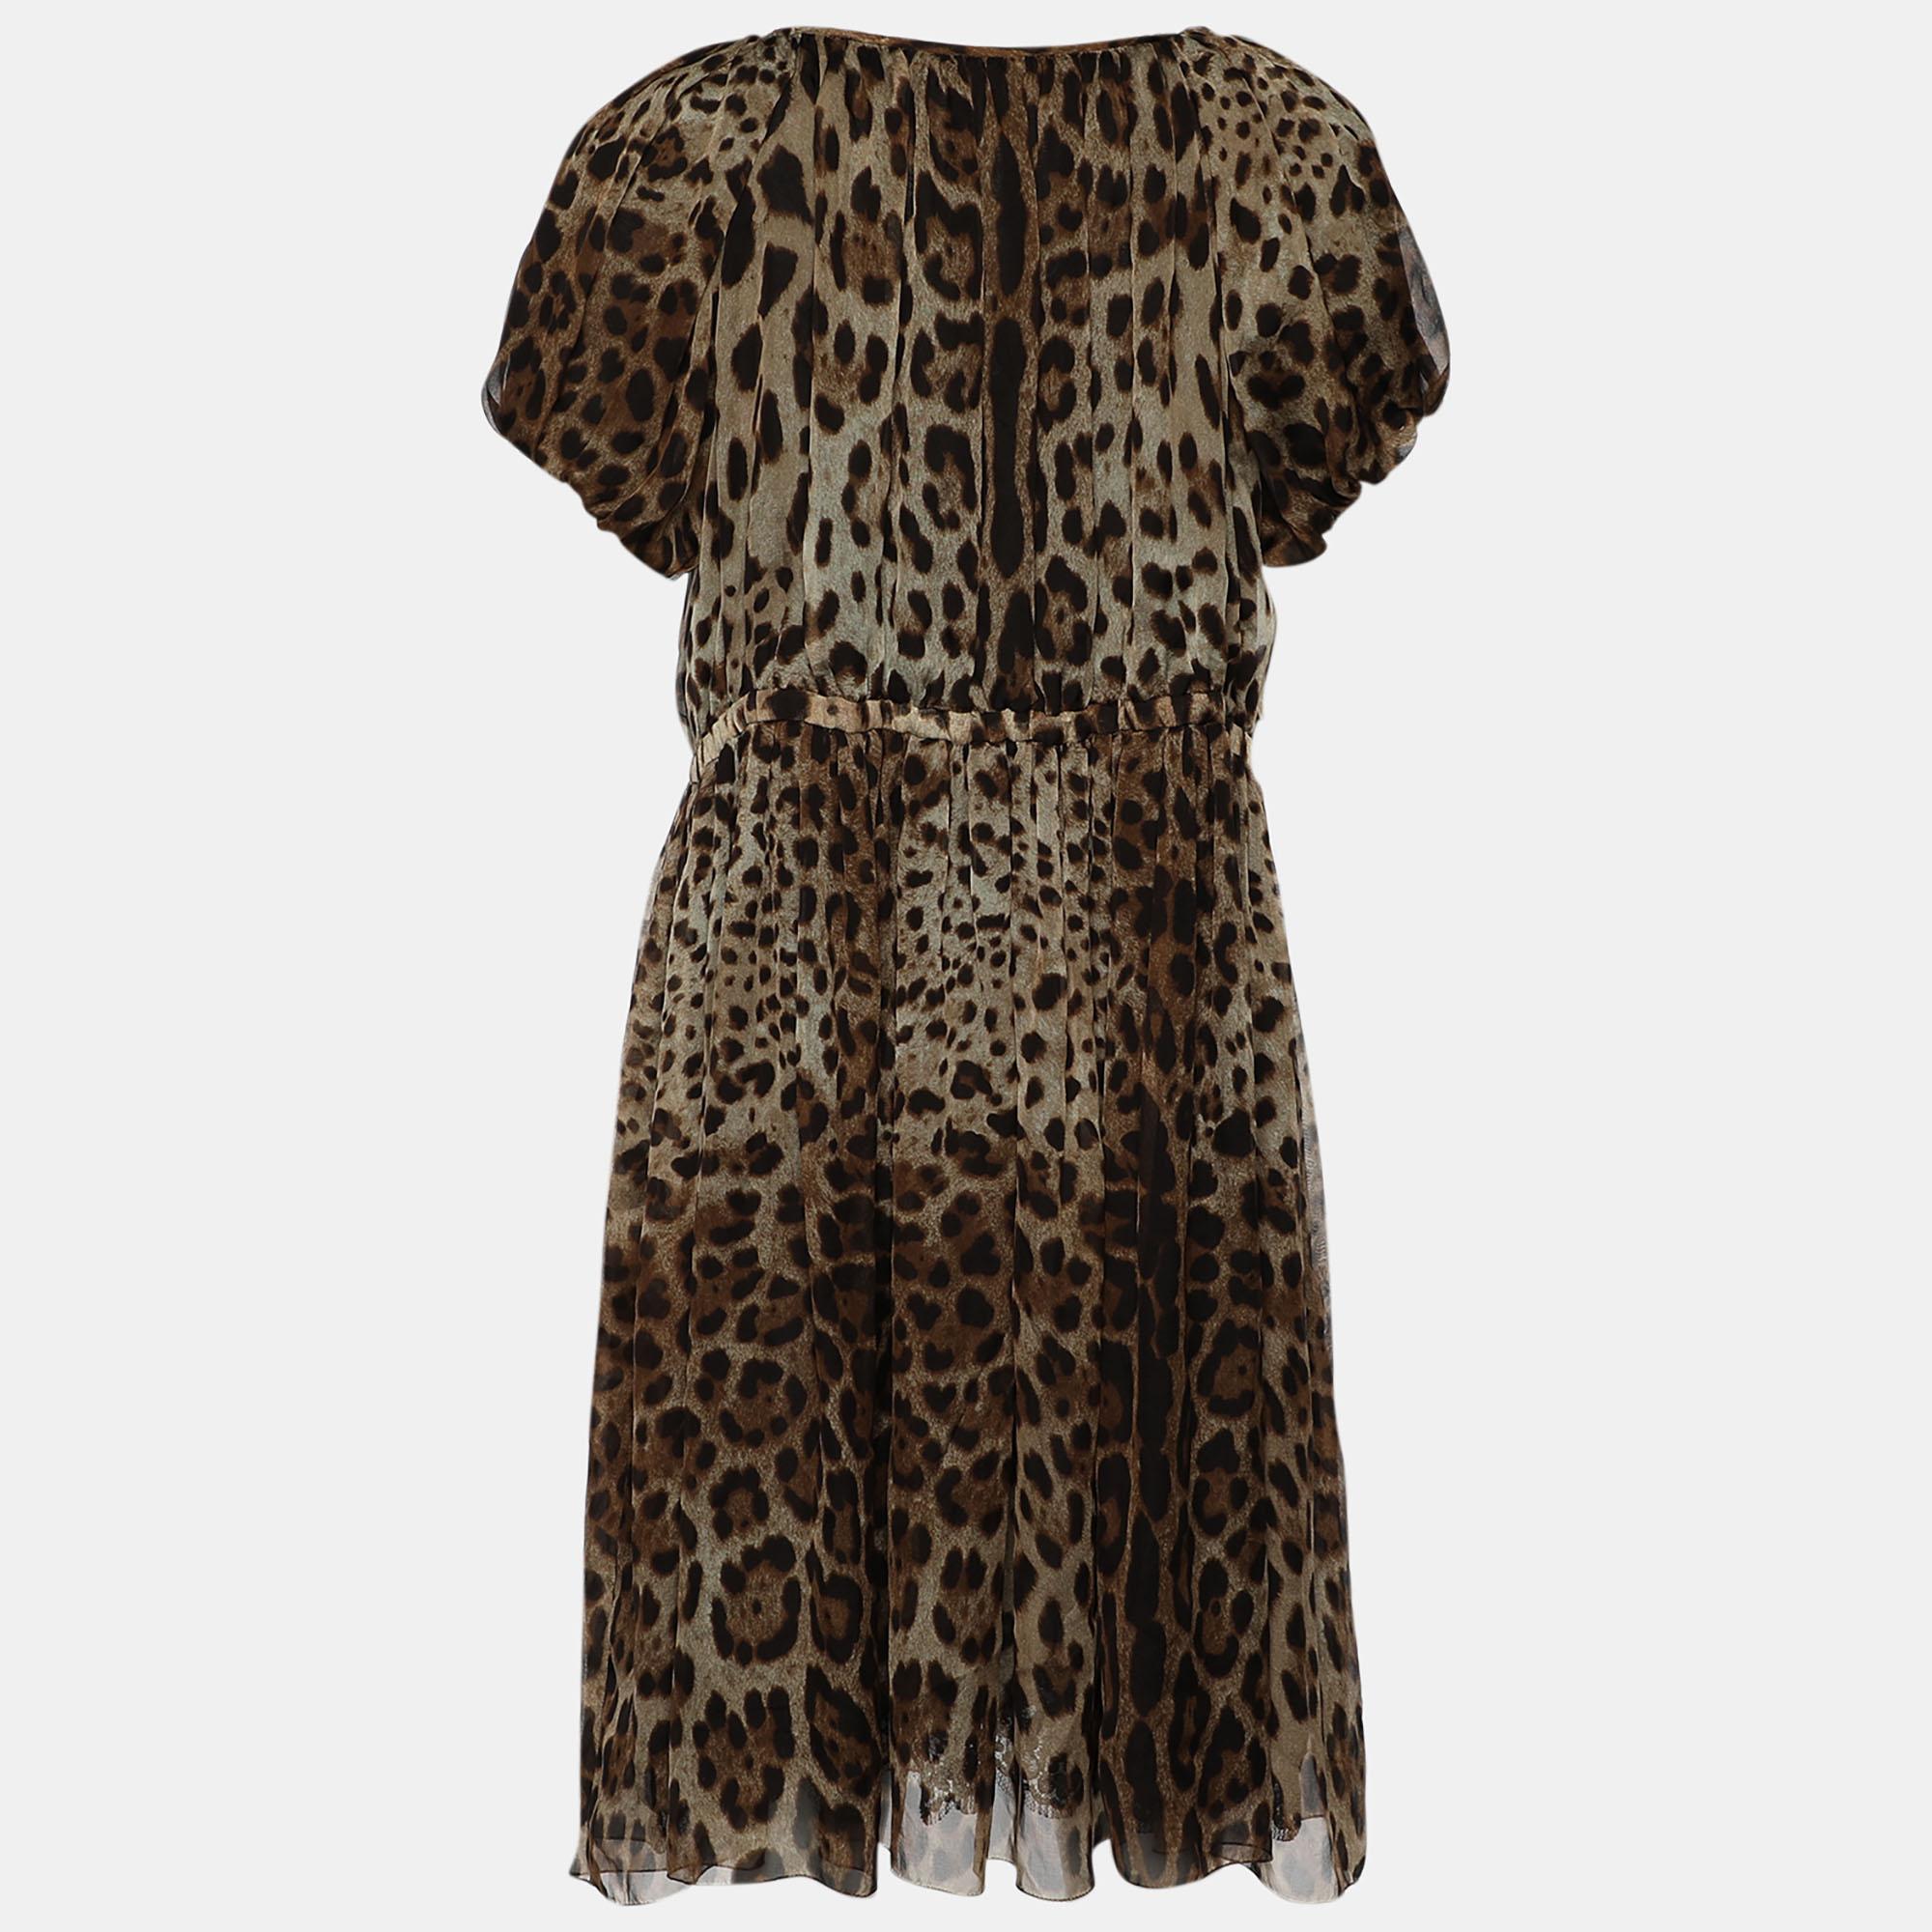 A fluid romance of leopard prints and a feminine silhouette. Created to fit you perfectly, this Dolce & Gabbana silk-blend dress has puffed sleeves, a fitted waist, and button details.

Includes: Price Tag